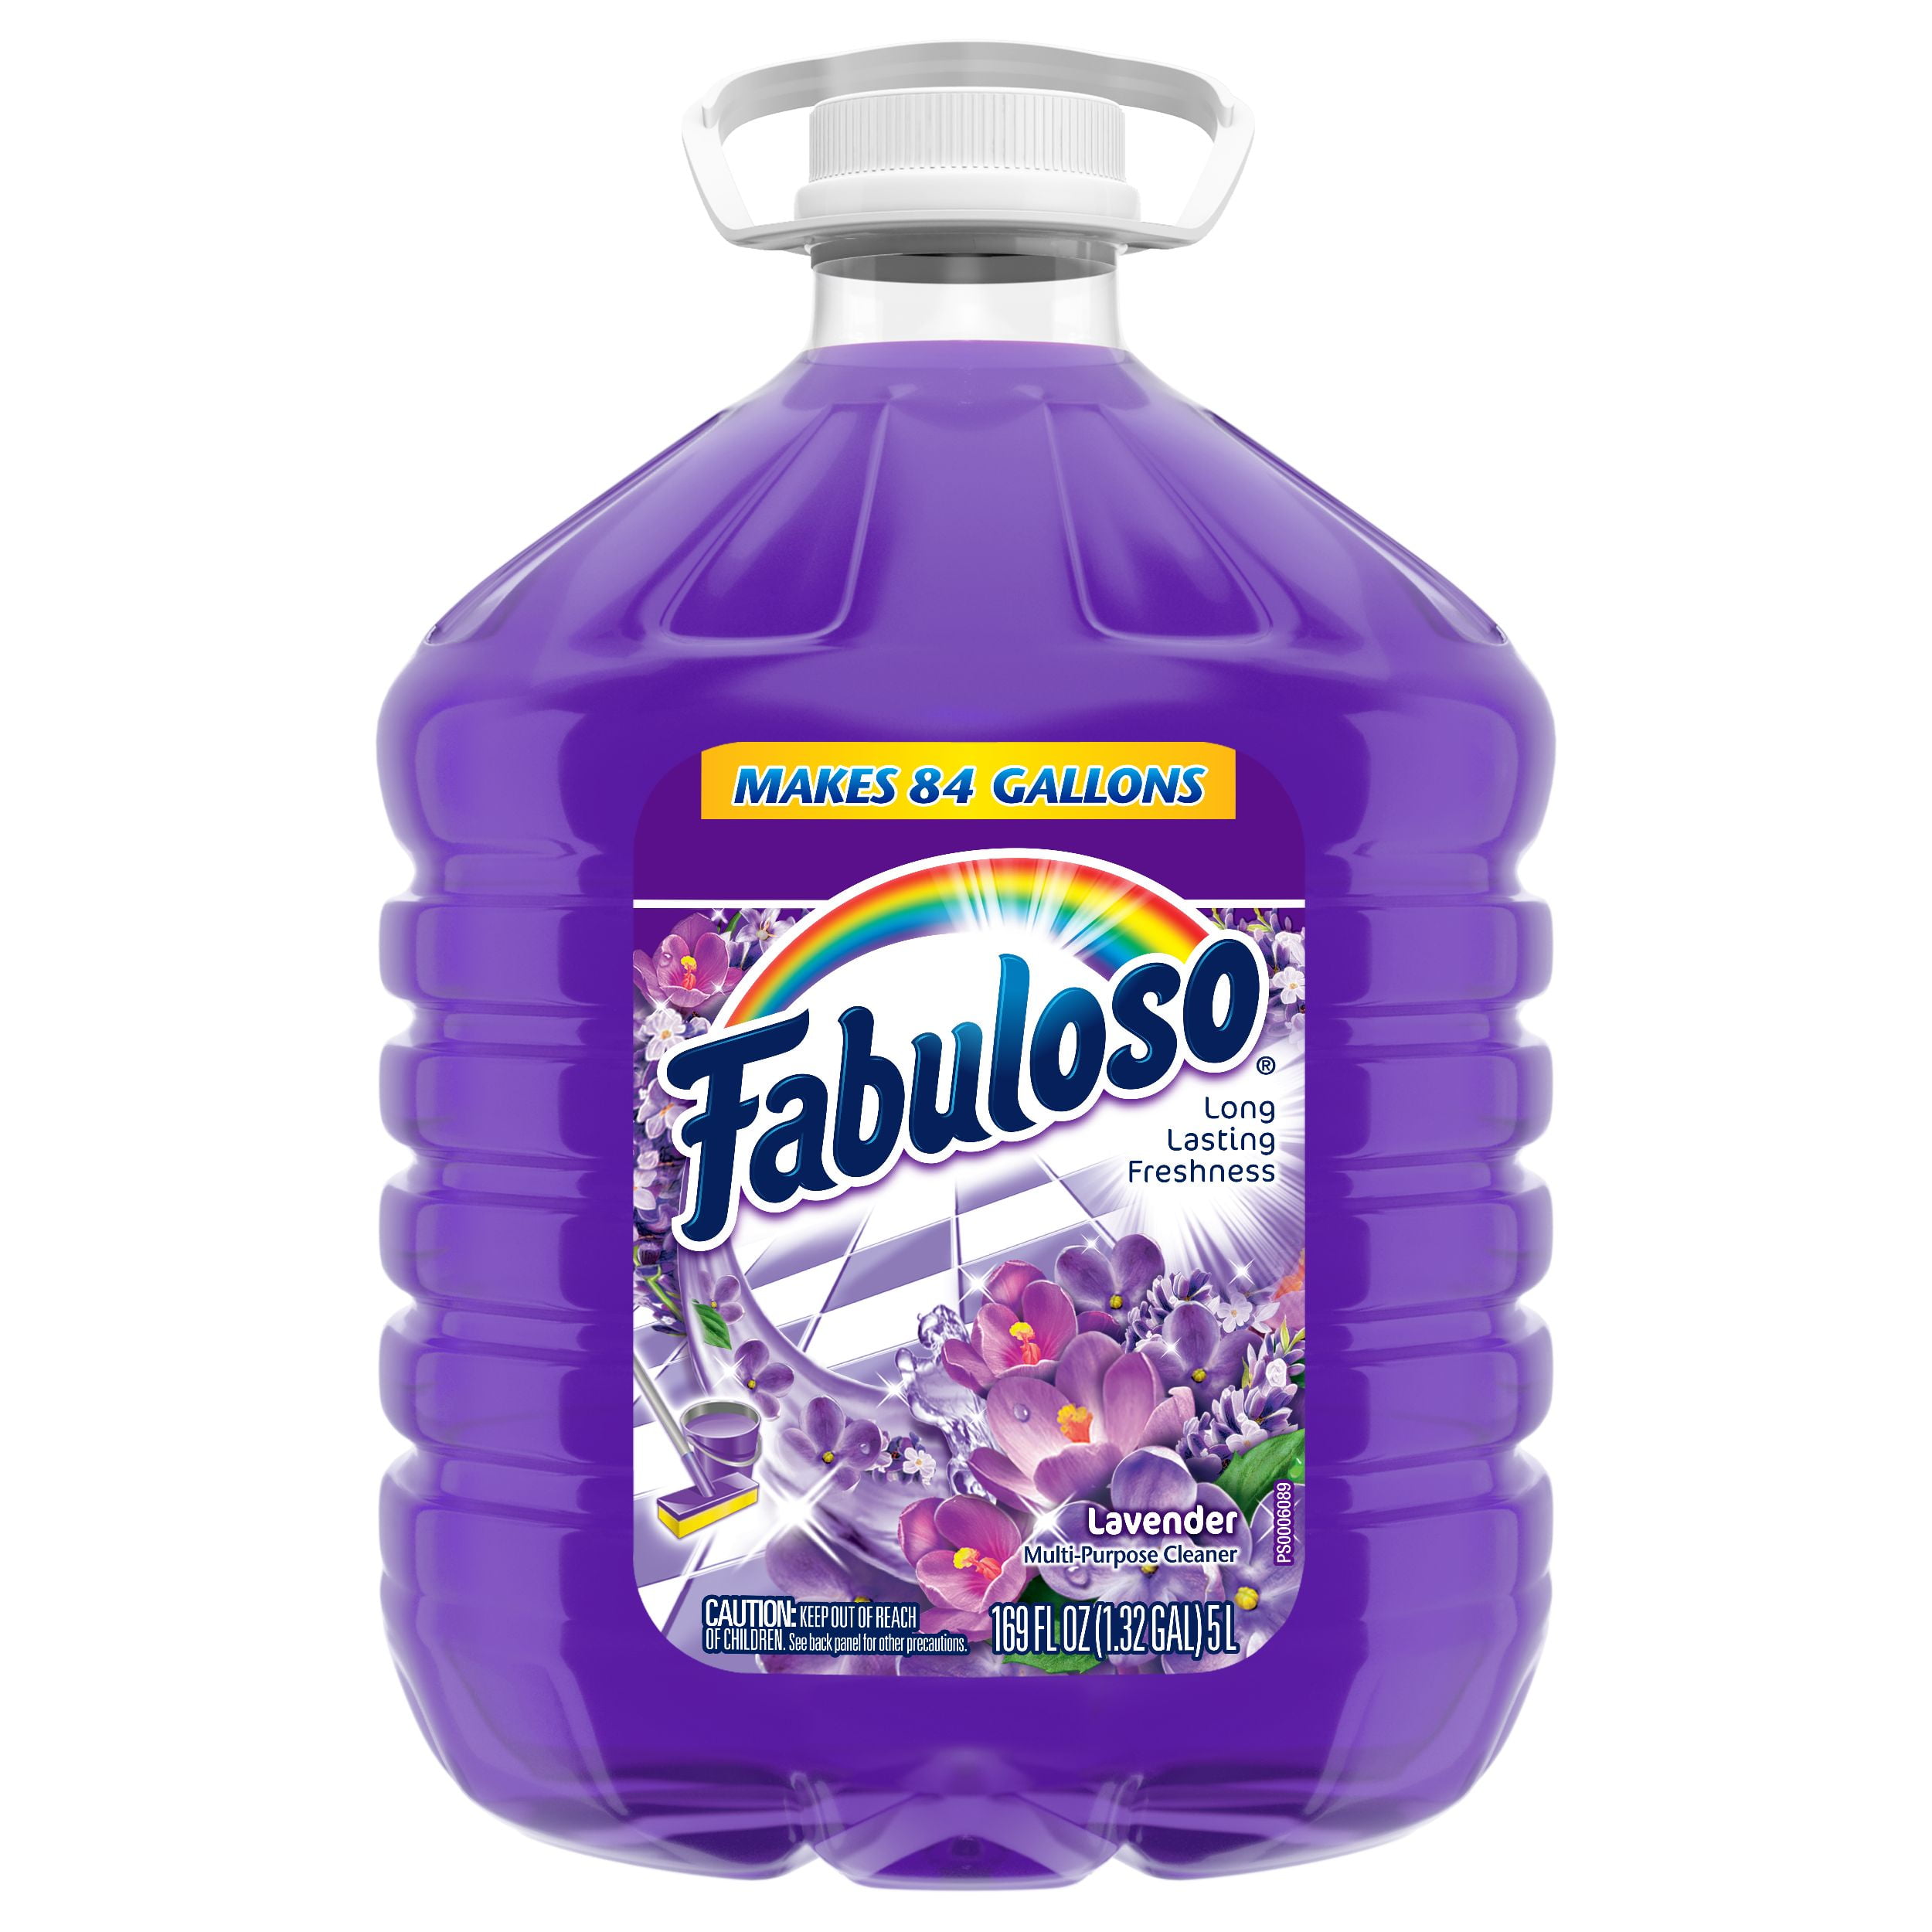 Fabuloso All Purpose Cleaner Lavender, Can Fabuloso Clean Hardwood Floors